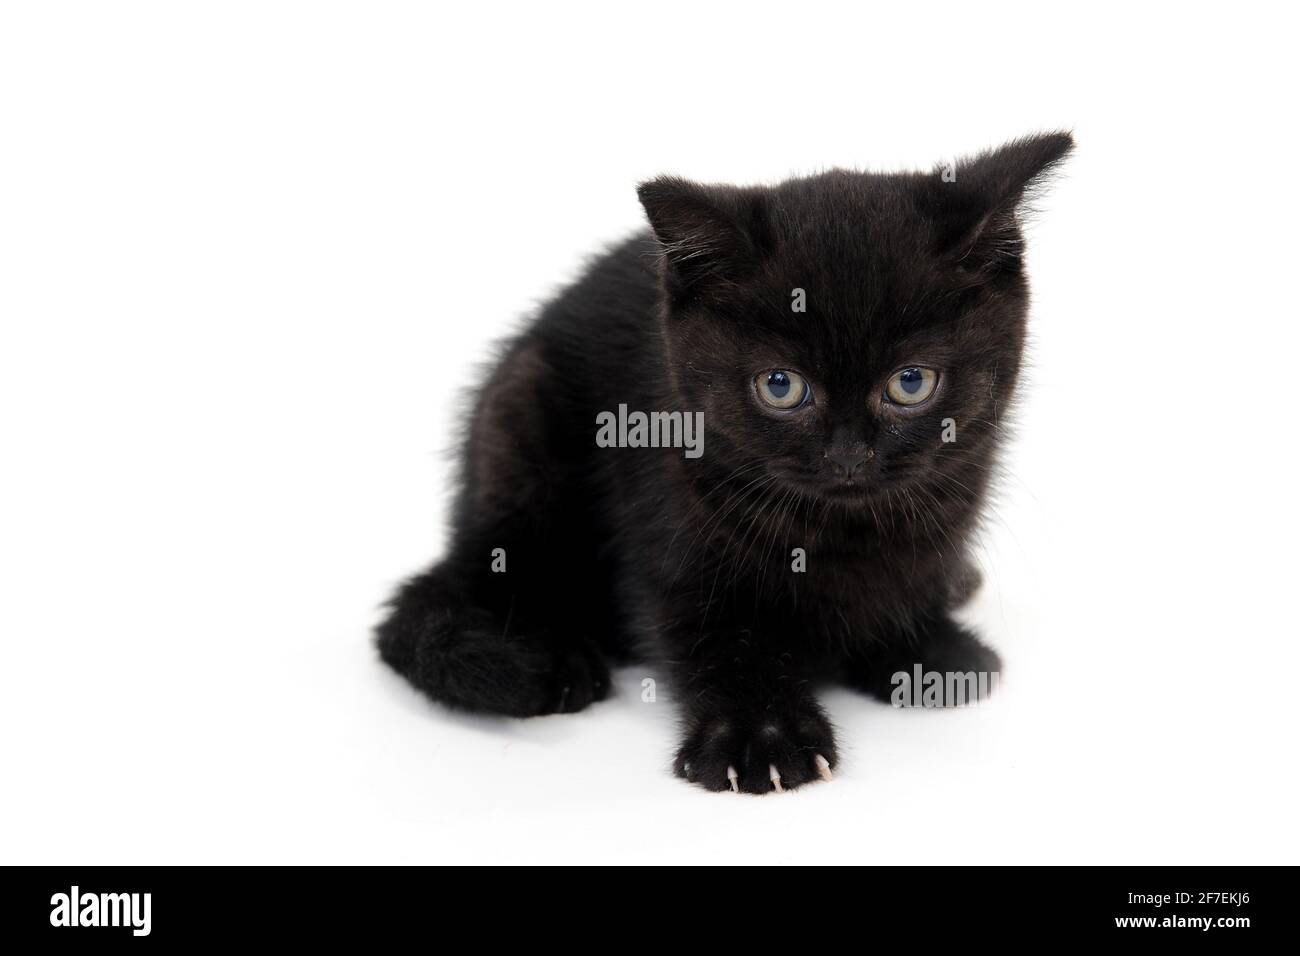 fluffy purebred black kitten with claws outstretched lies on an isolated background Stock Photo